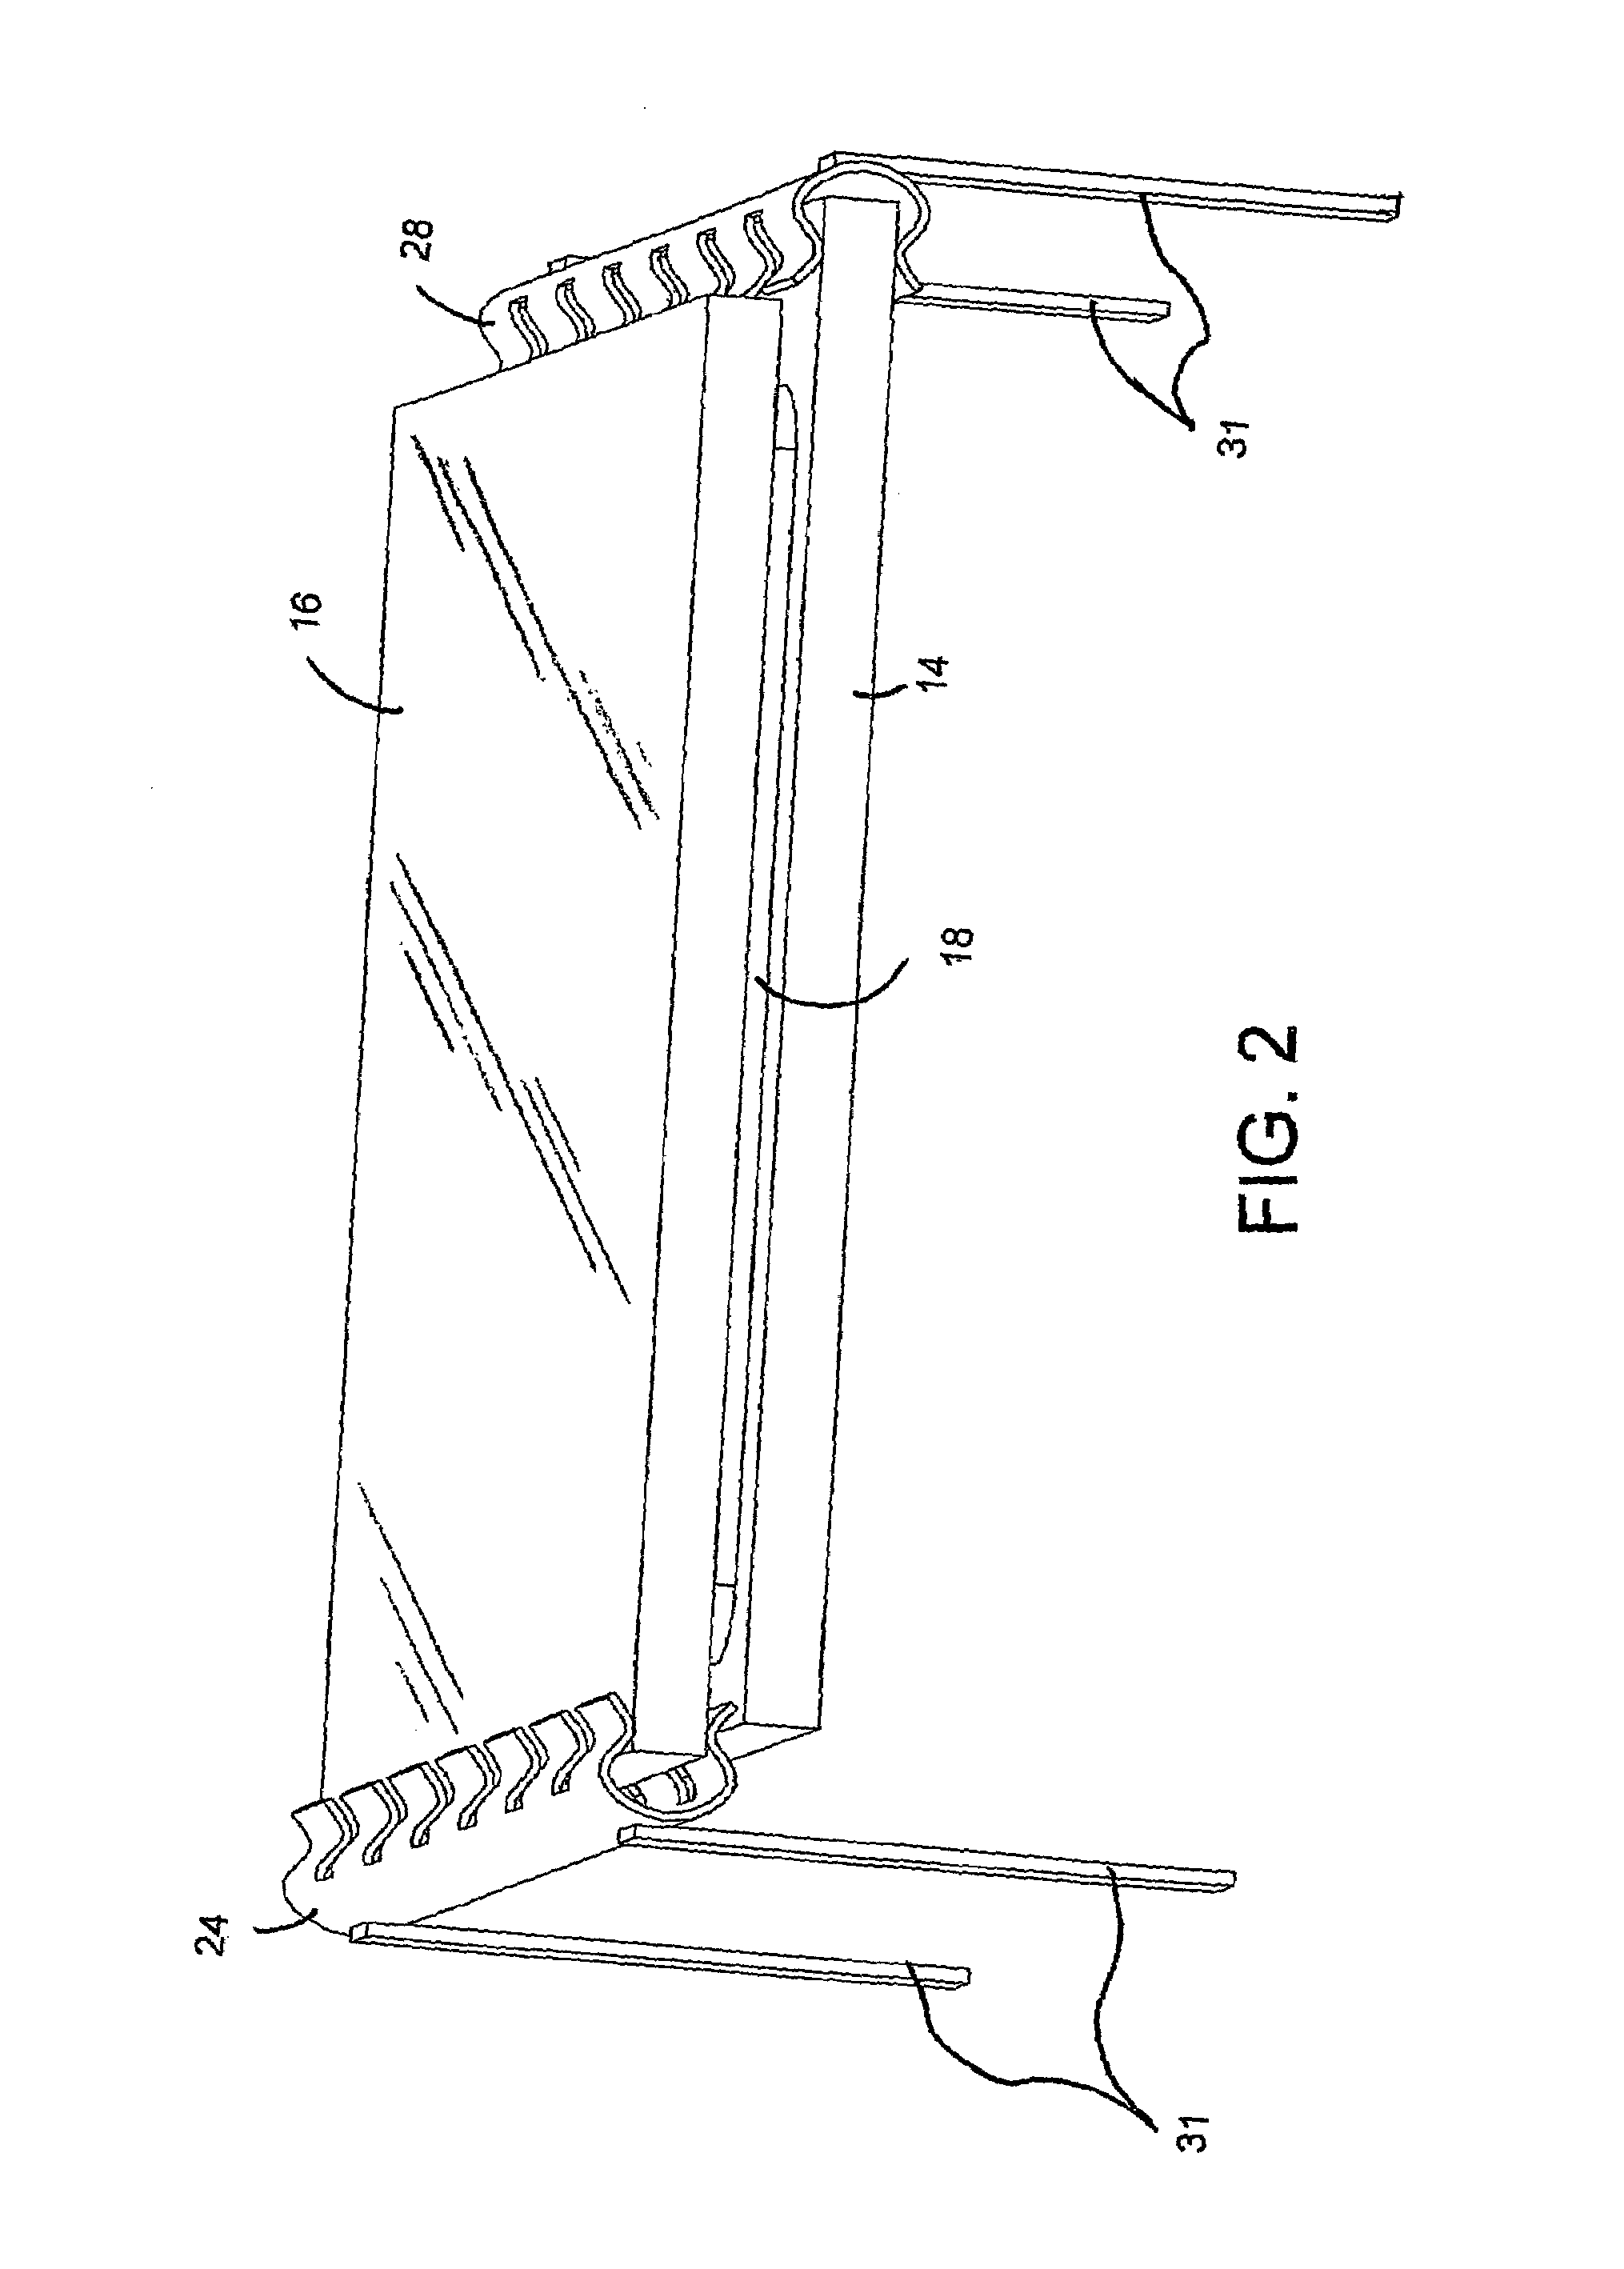 High power radiation emitter device and heat dissipating package for electronic components